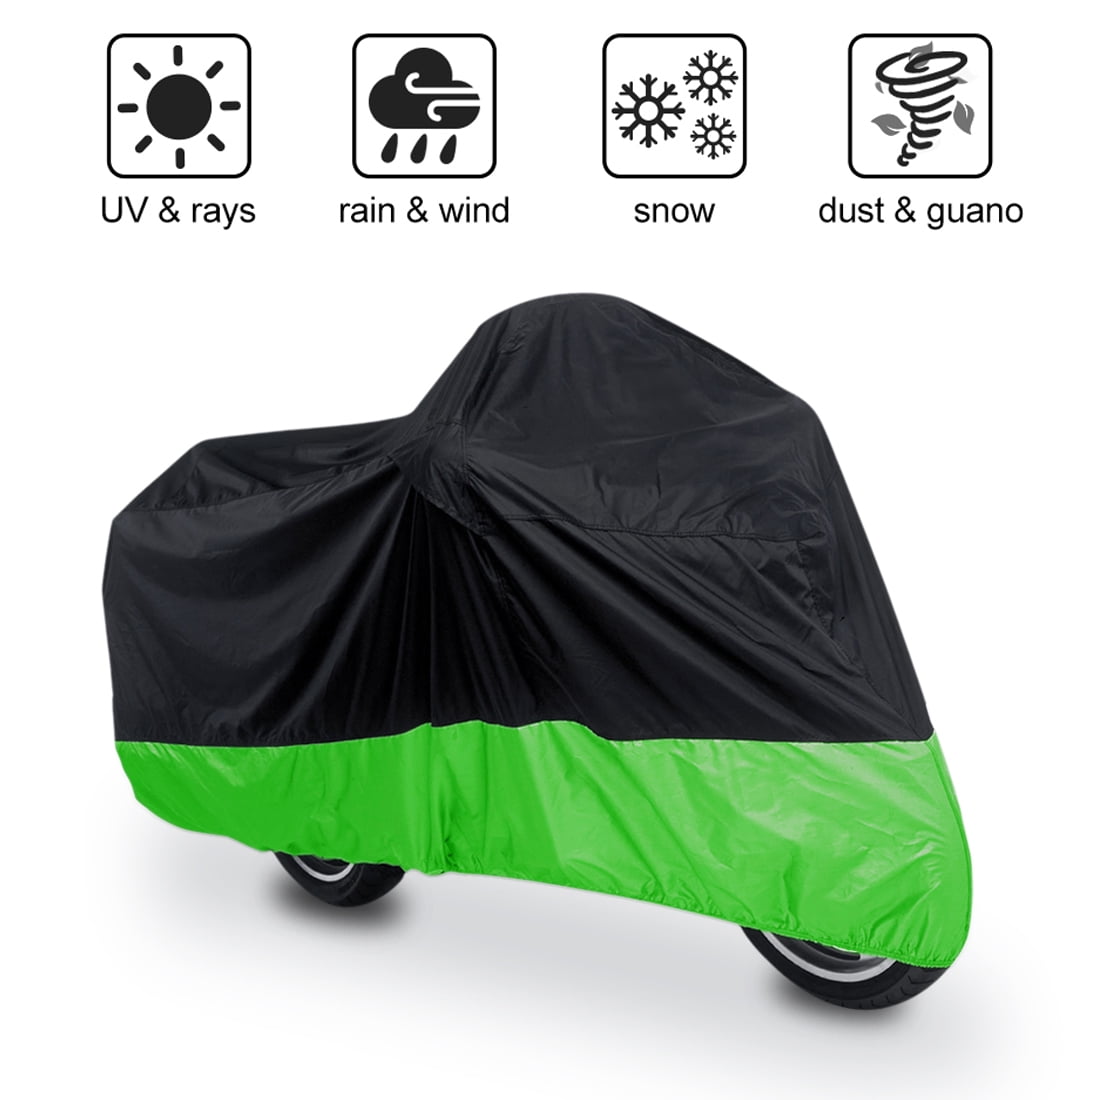 Details about   XL Weatherproof Motorcycle Cover For Kawasaki Ninja EX 250 250R 300 500 650 650R 